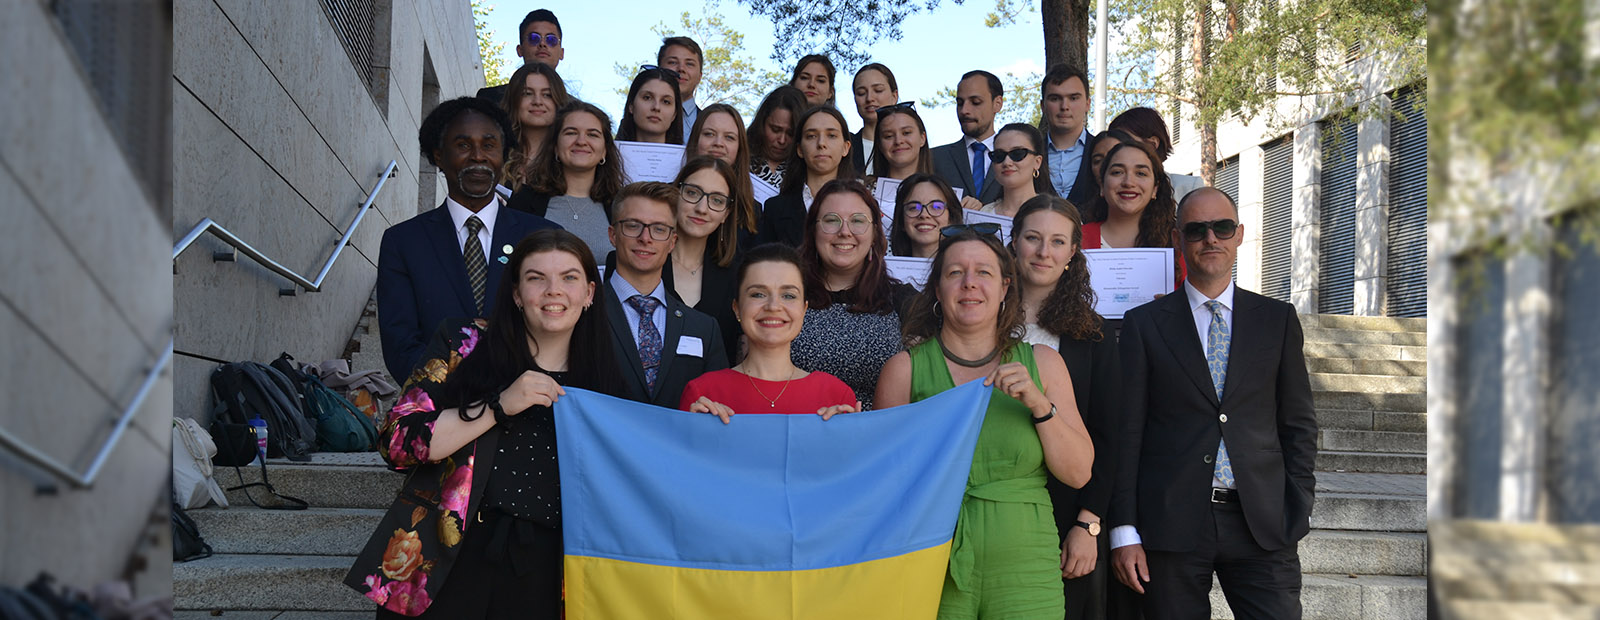 A group of faculty and students gather on a set of stairs with a Ukrainian flag